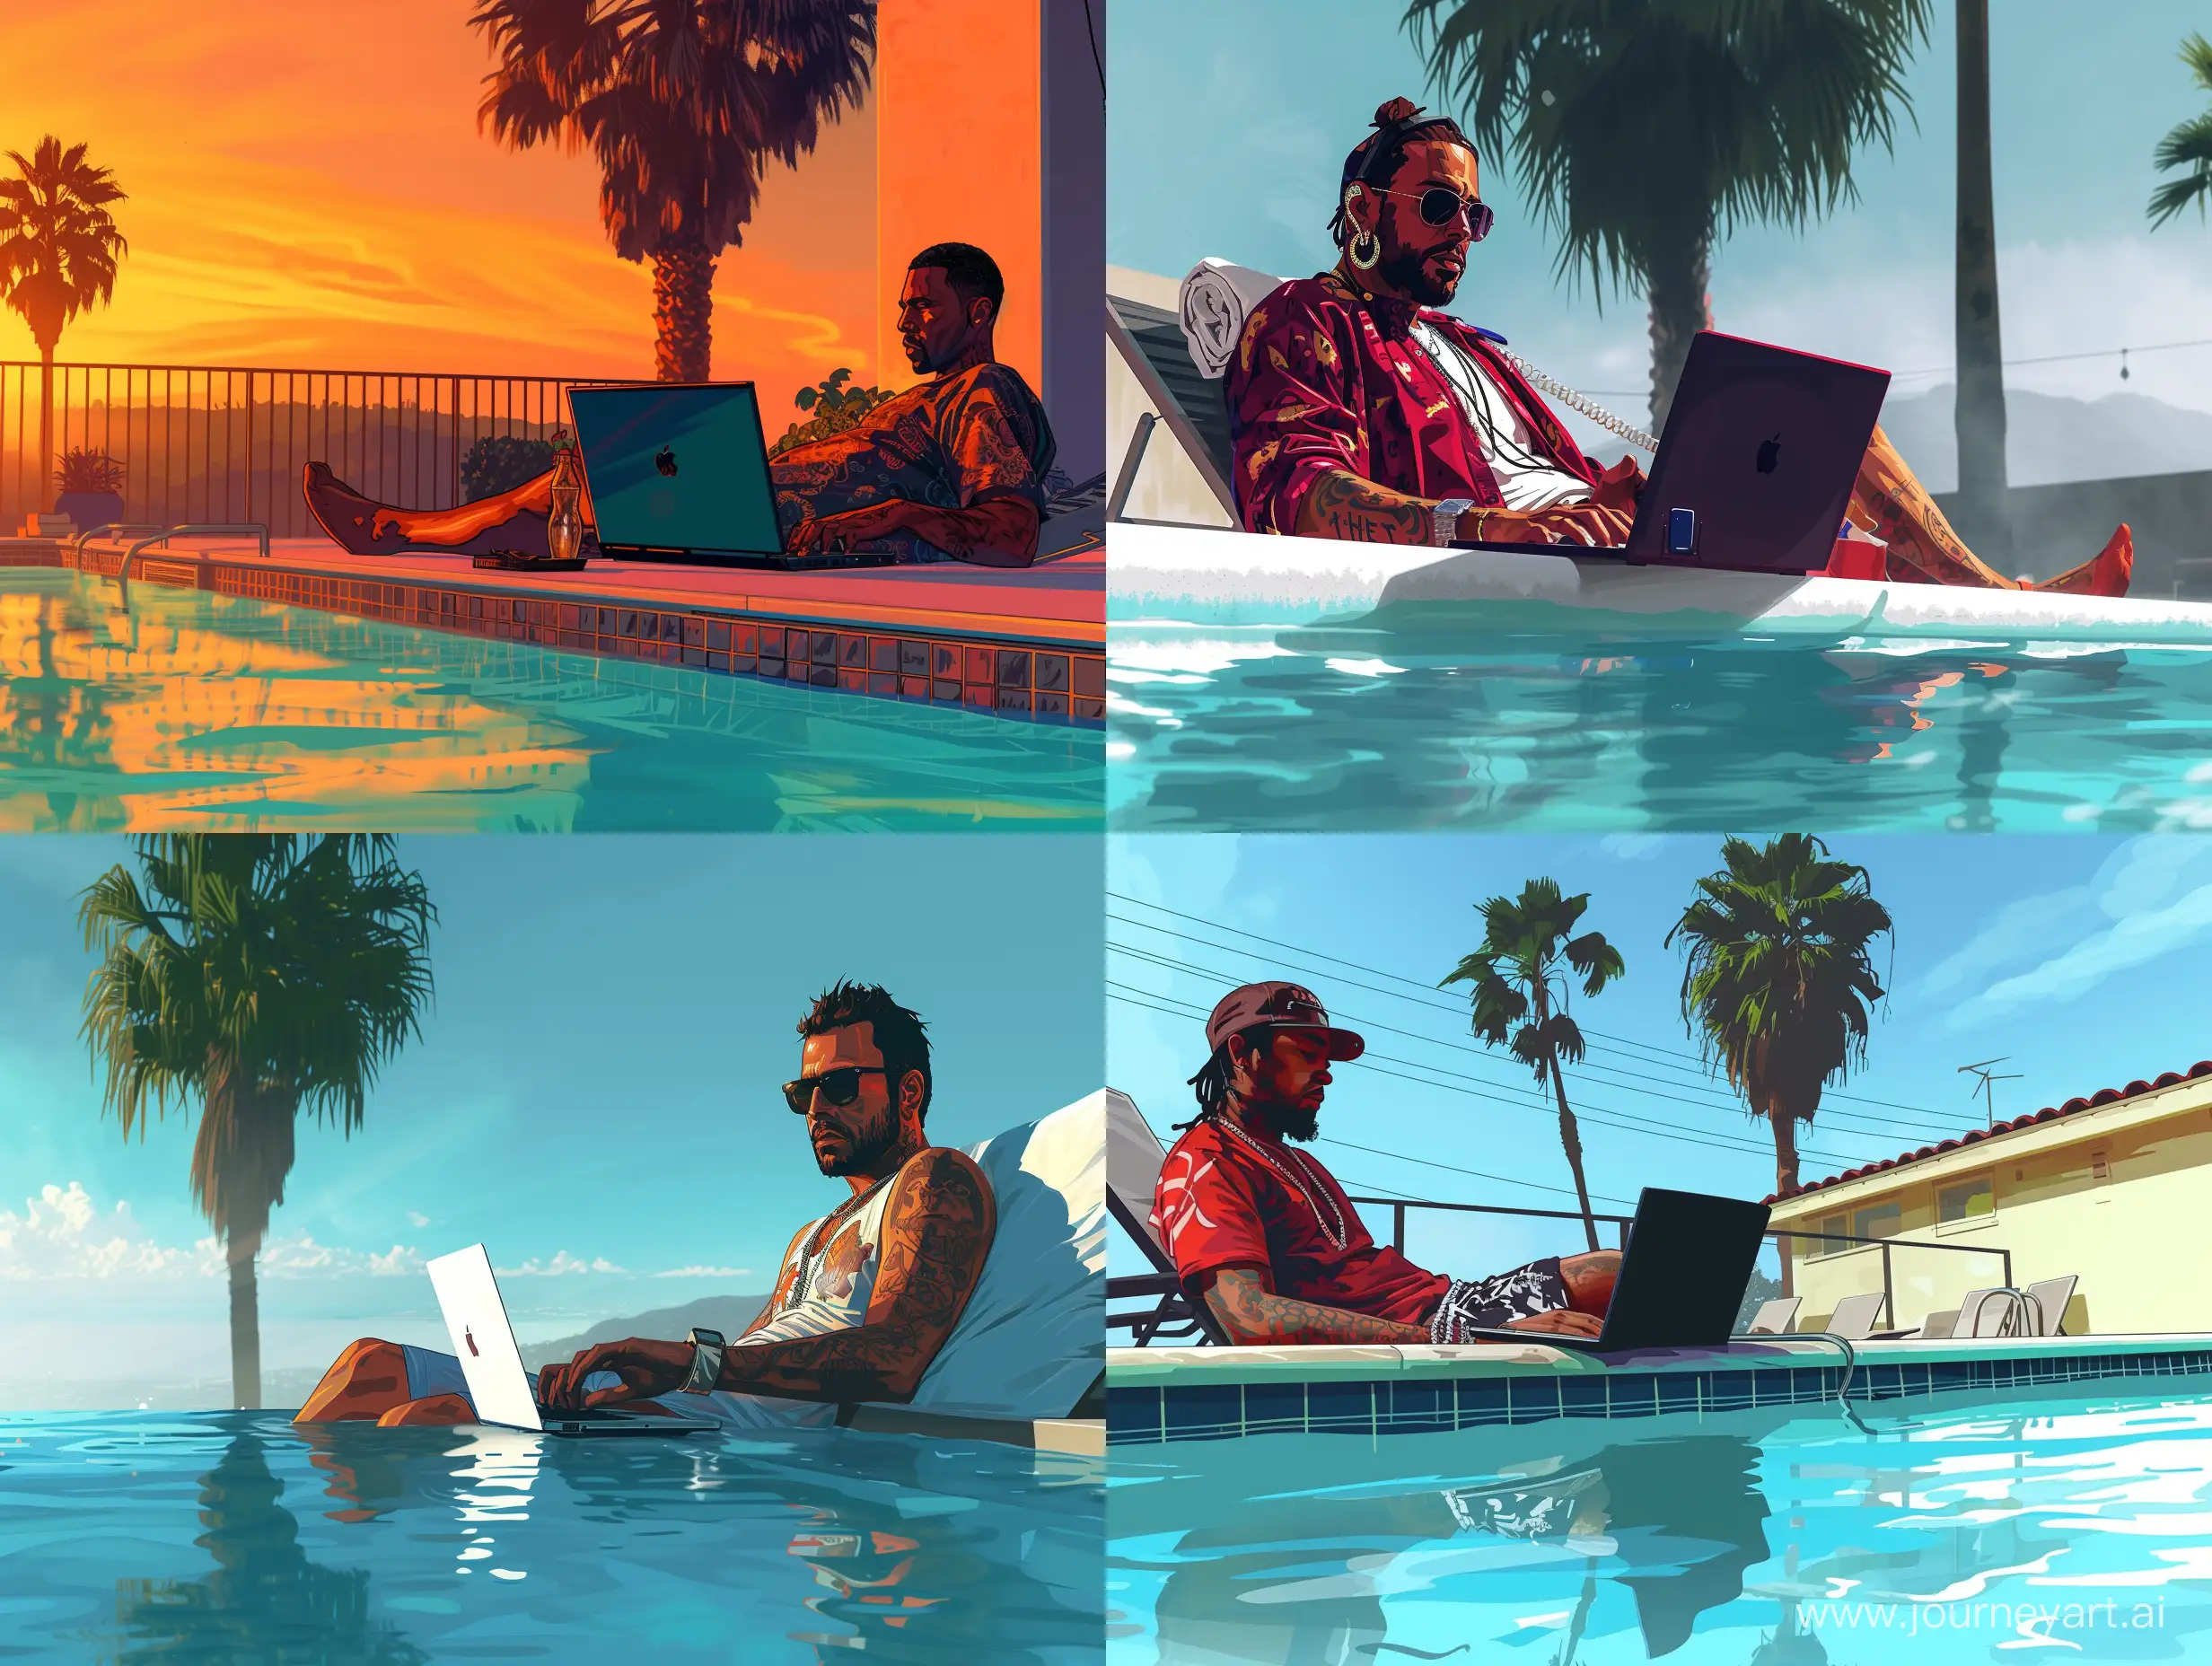 relaxing at the pool with a laptop, grand theft auto artstyle, loading screen, celshading, highly detailed, studio lighting